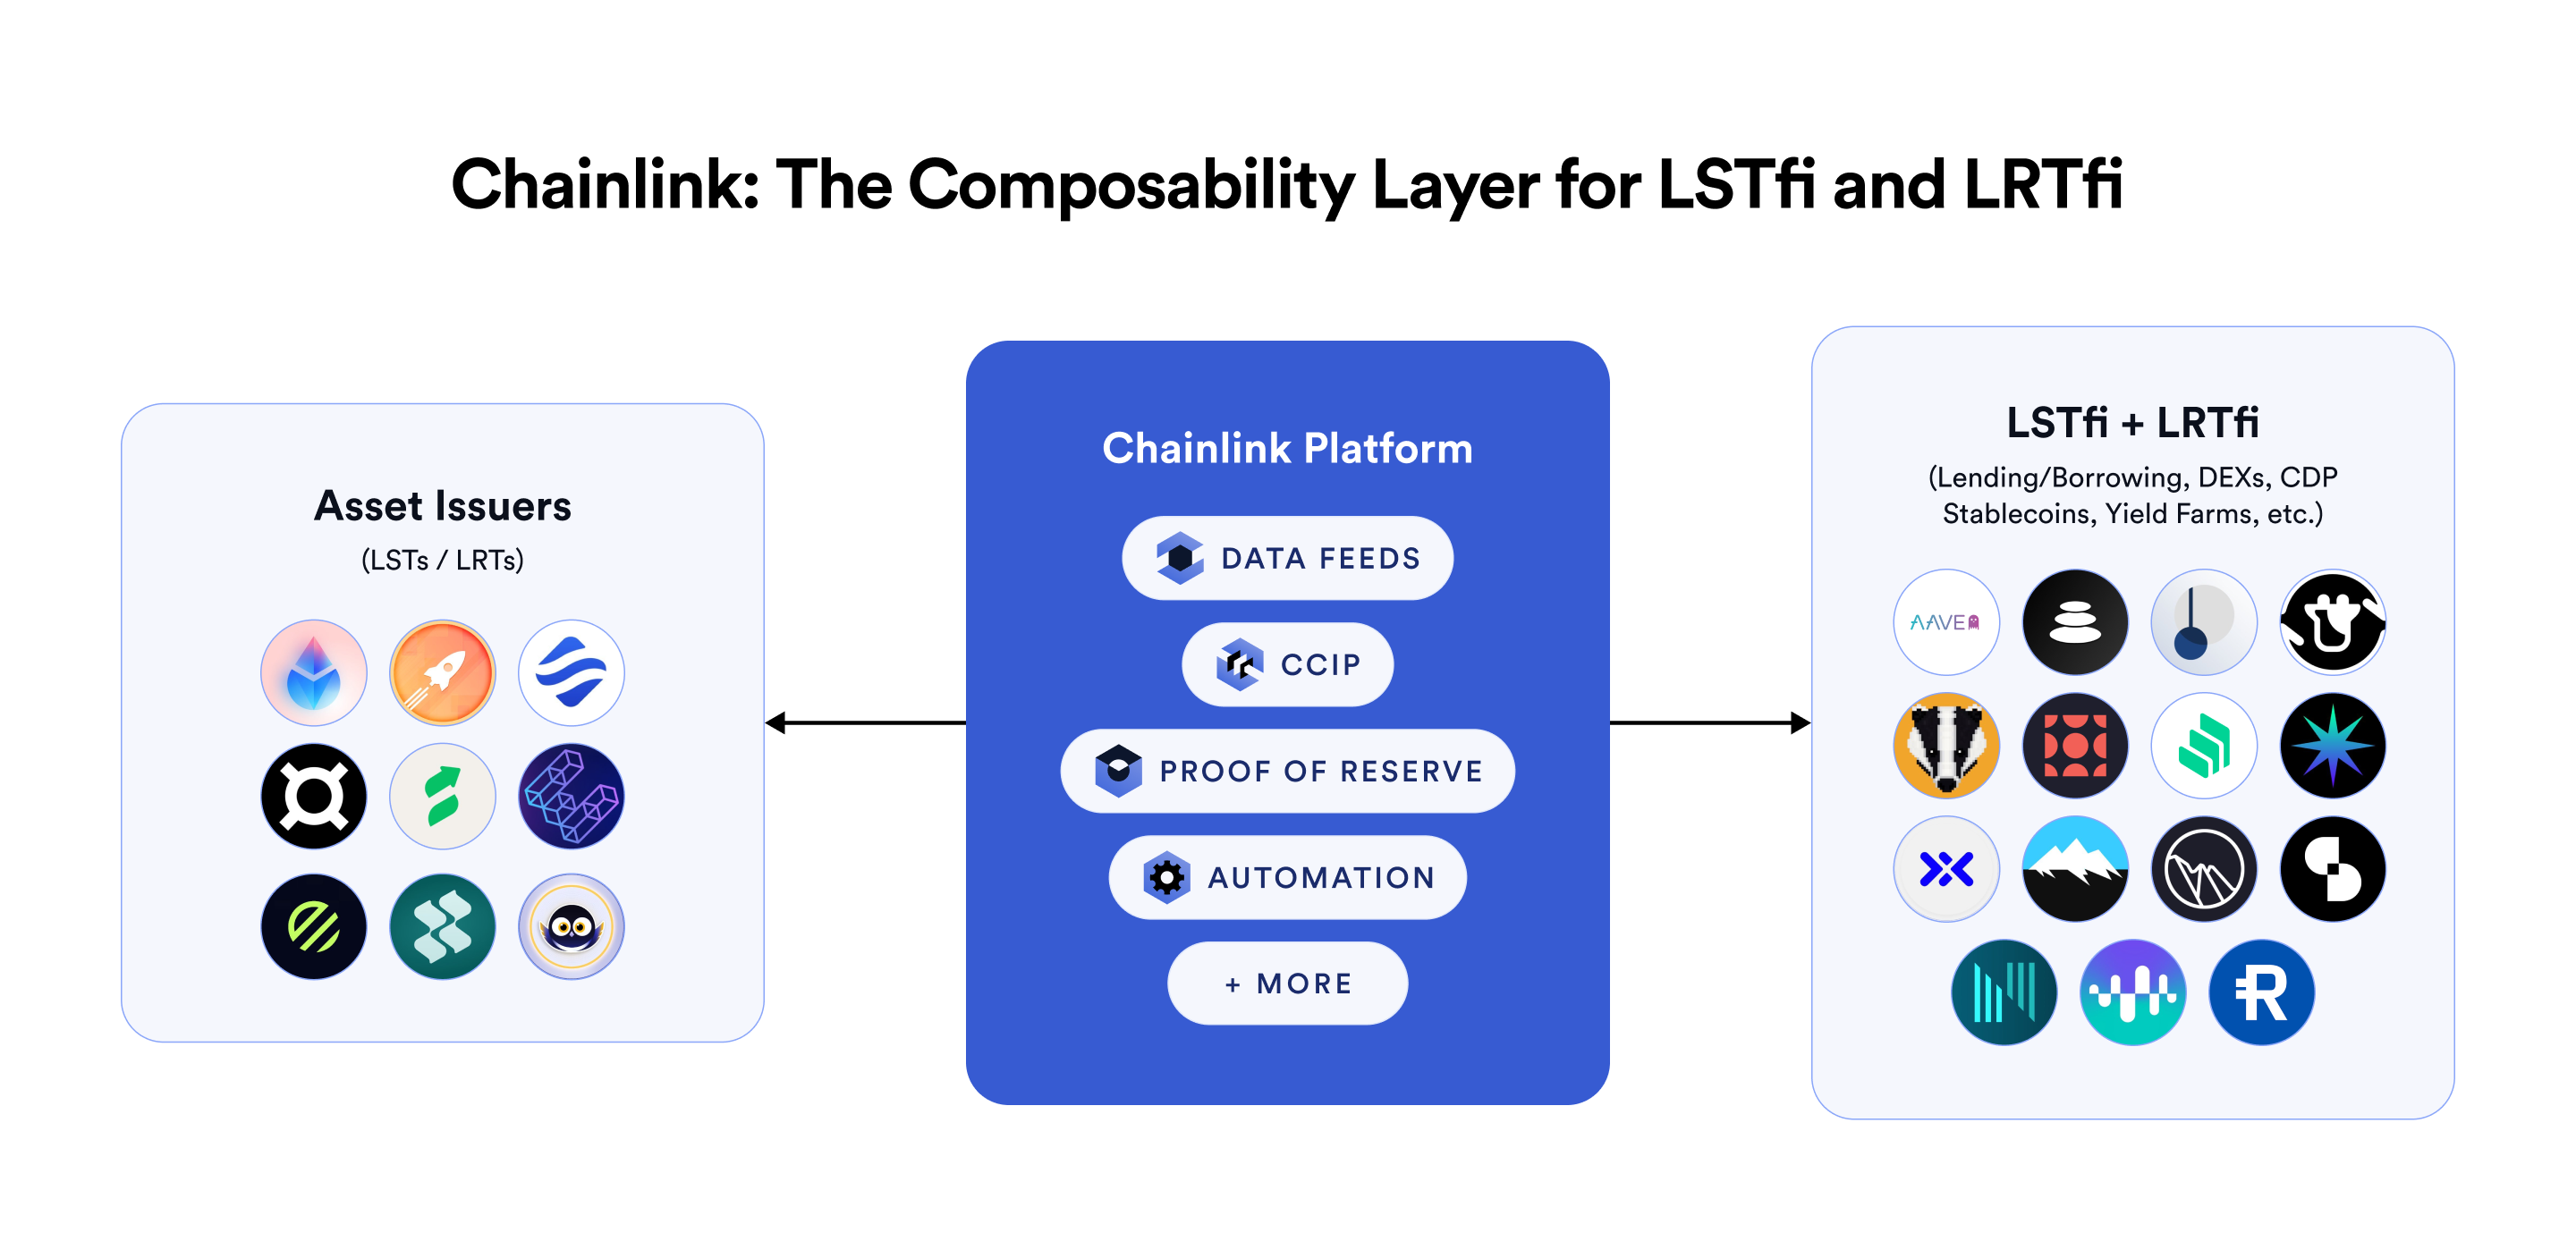 The Chainlink Platform supports LSTs and LRTs in DeFi.